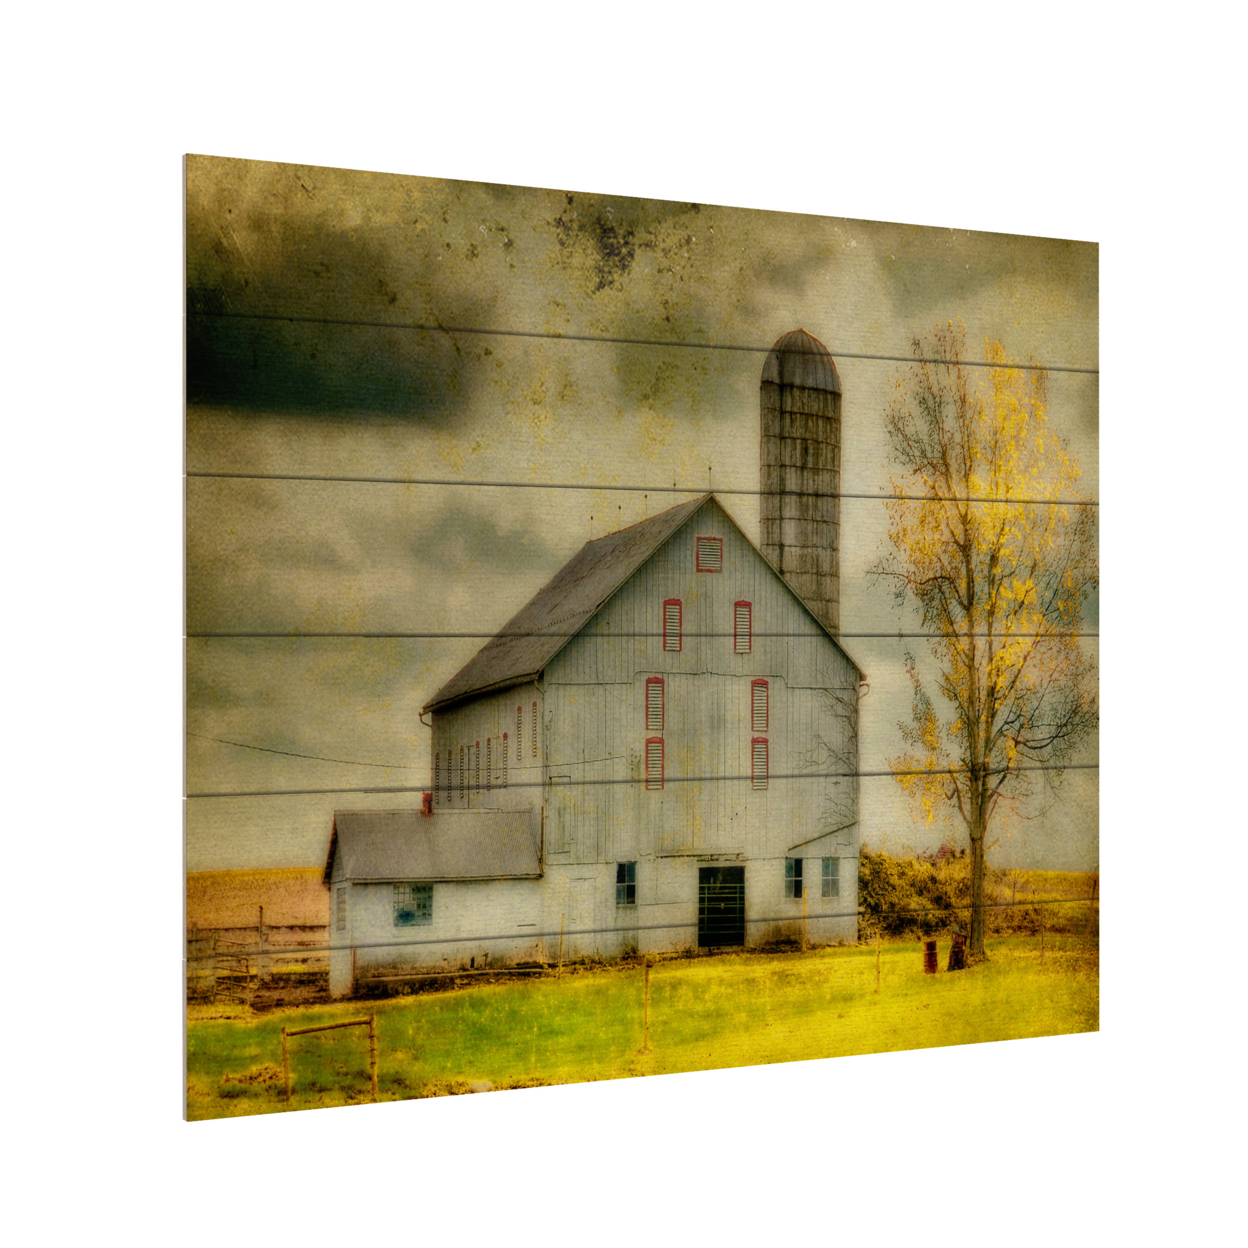 Wooden Slat Art 18 X 22 Inches Titled Old Barn On Stormy Afternoon Ready To Hang Home Decor Picture